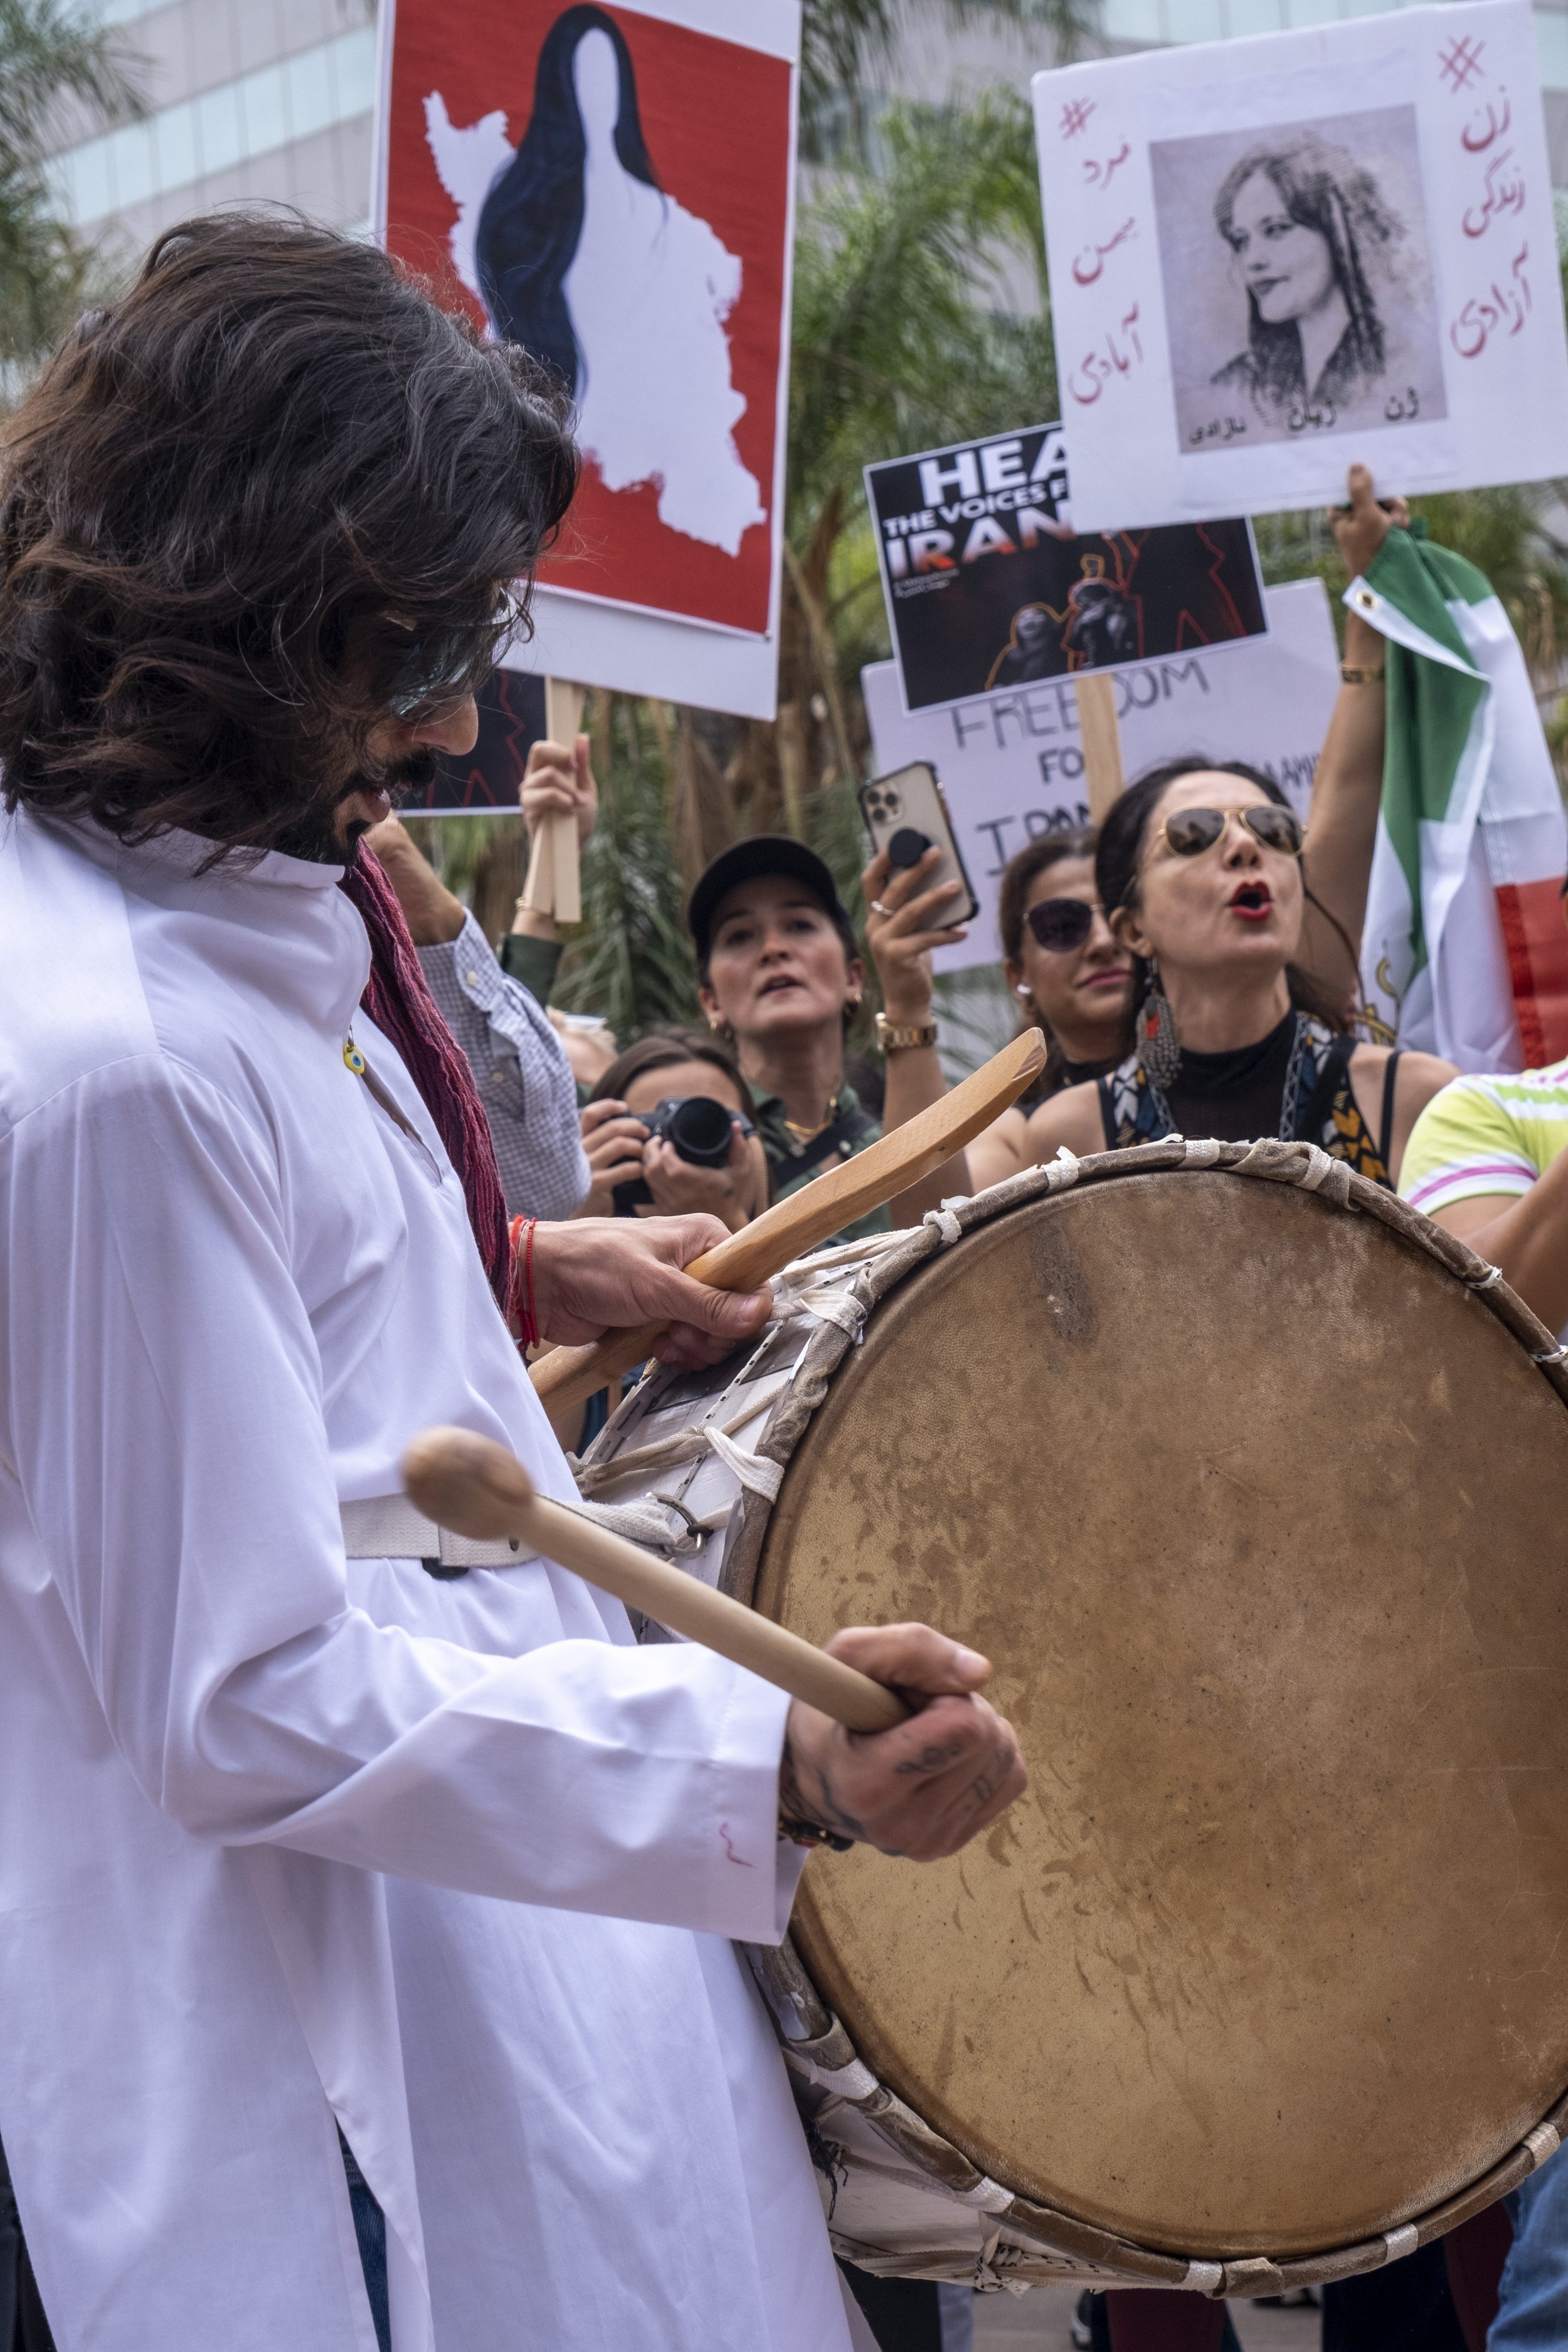  Drummers play in Pershing Square, as supporters chant for women’s freedoms. Freedom Rally for Iran on Saturday, October 1, Los Angeles, Calif. (Anna Sophia Moltke | The Corsair) 